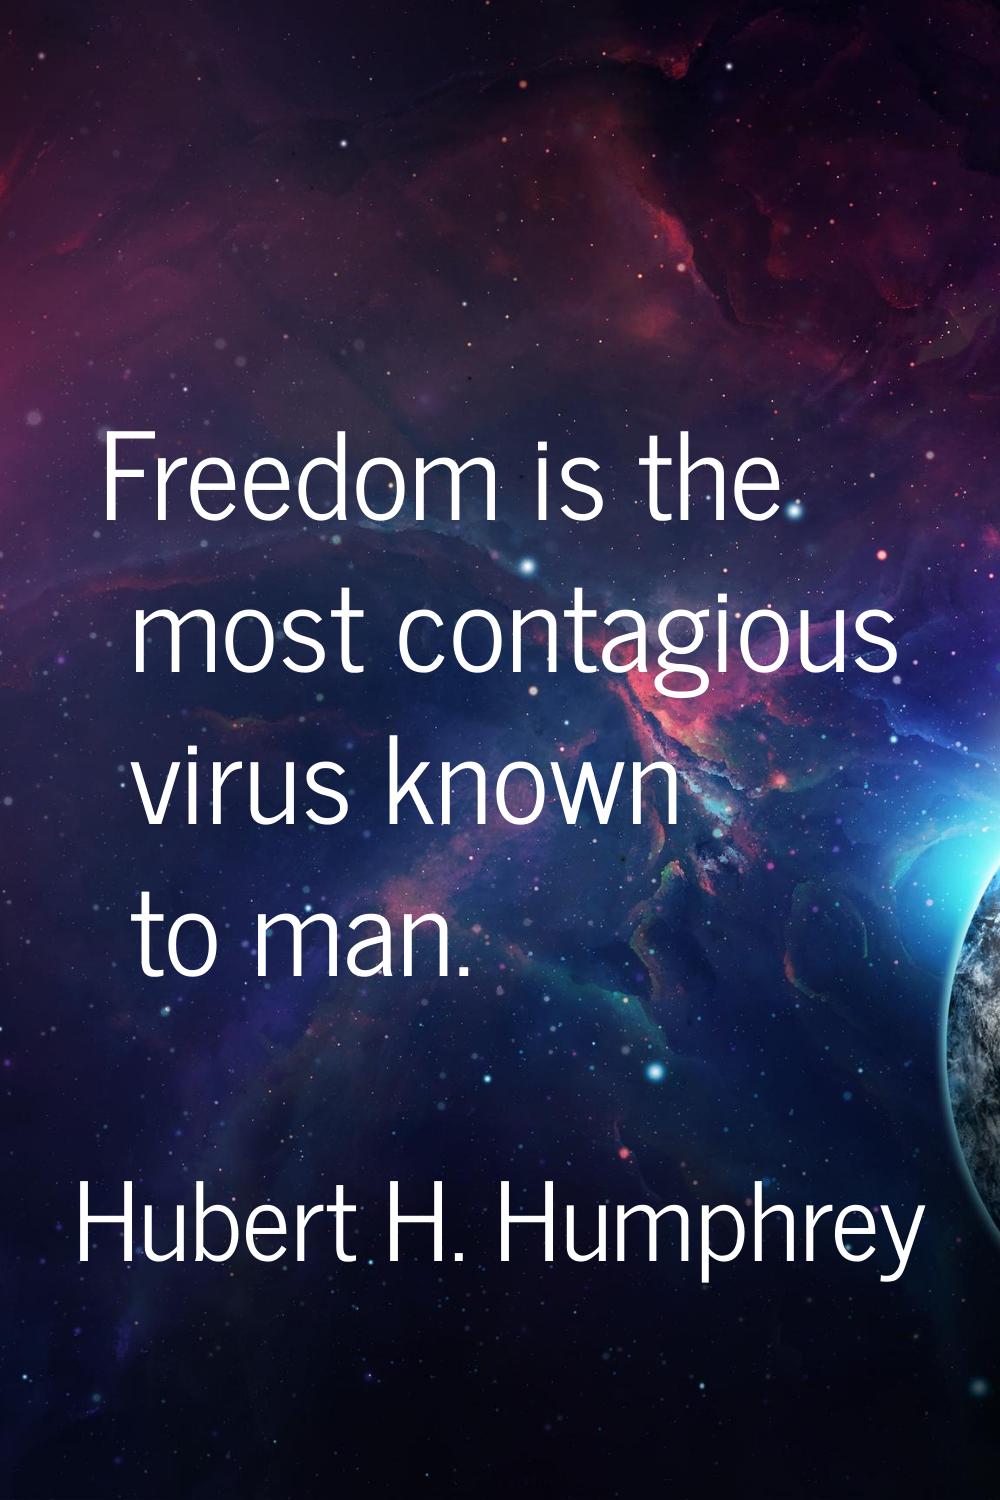 Freedom is the most contagious virus known to man.